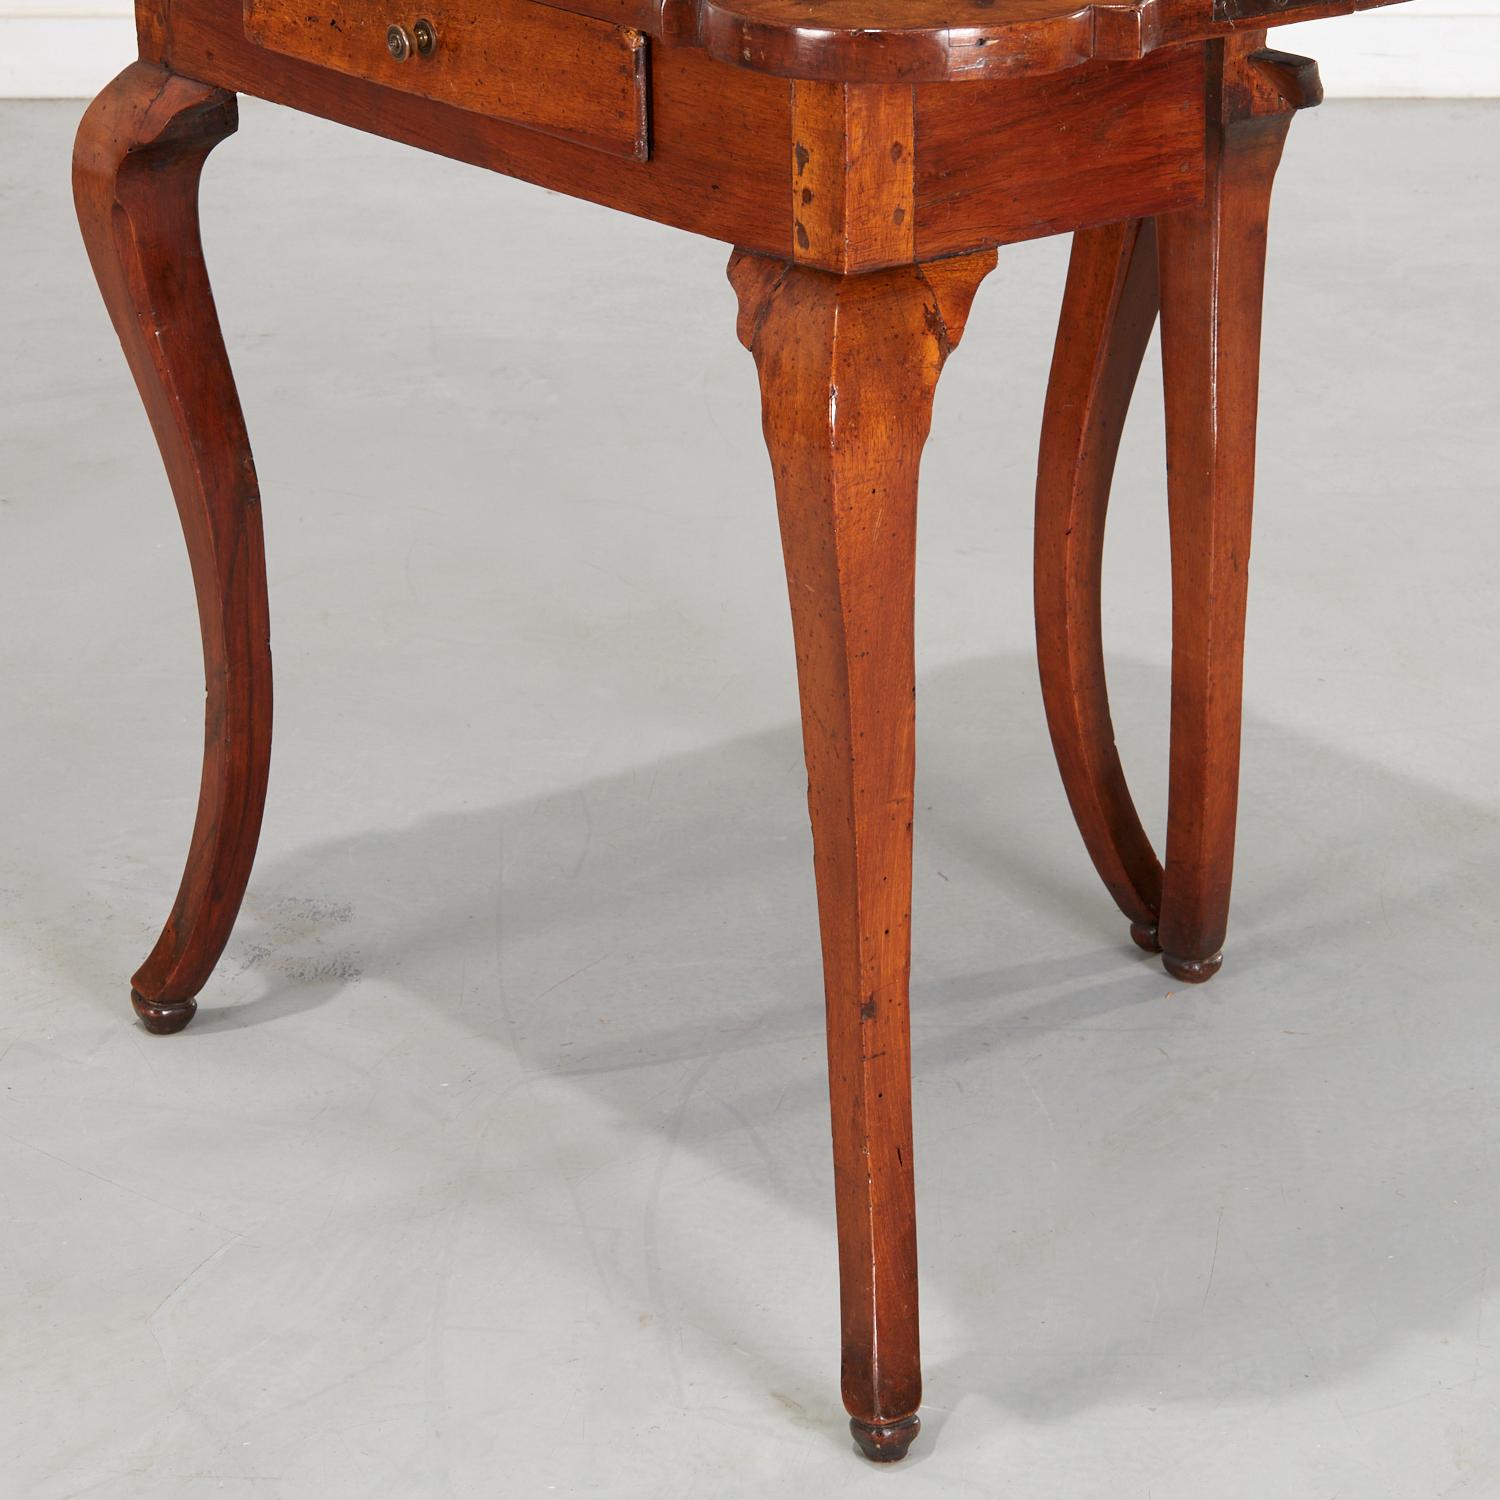 19th C. Circassian Walnut Games Table with Bookmatched Burl Wood Top For Sale 1